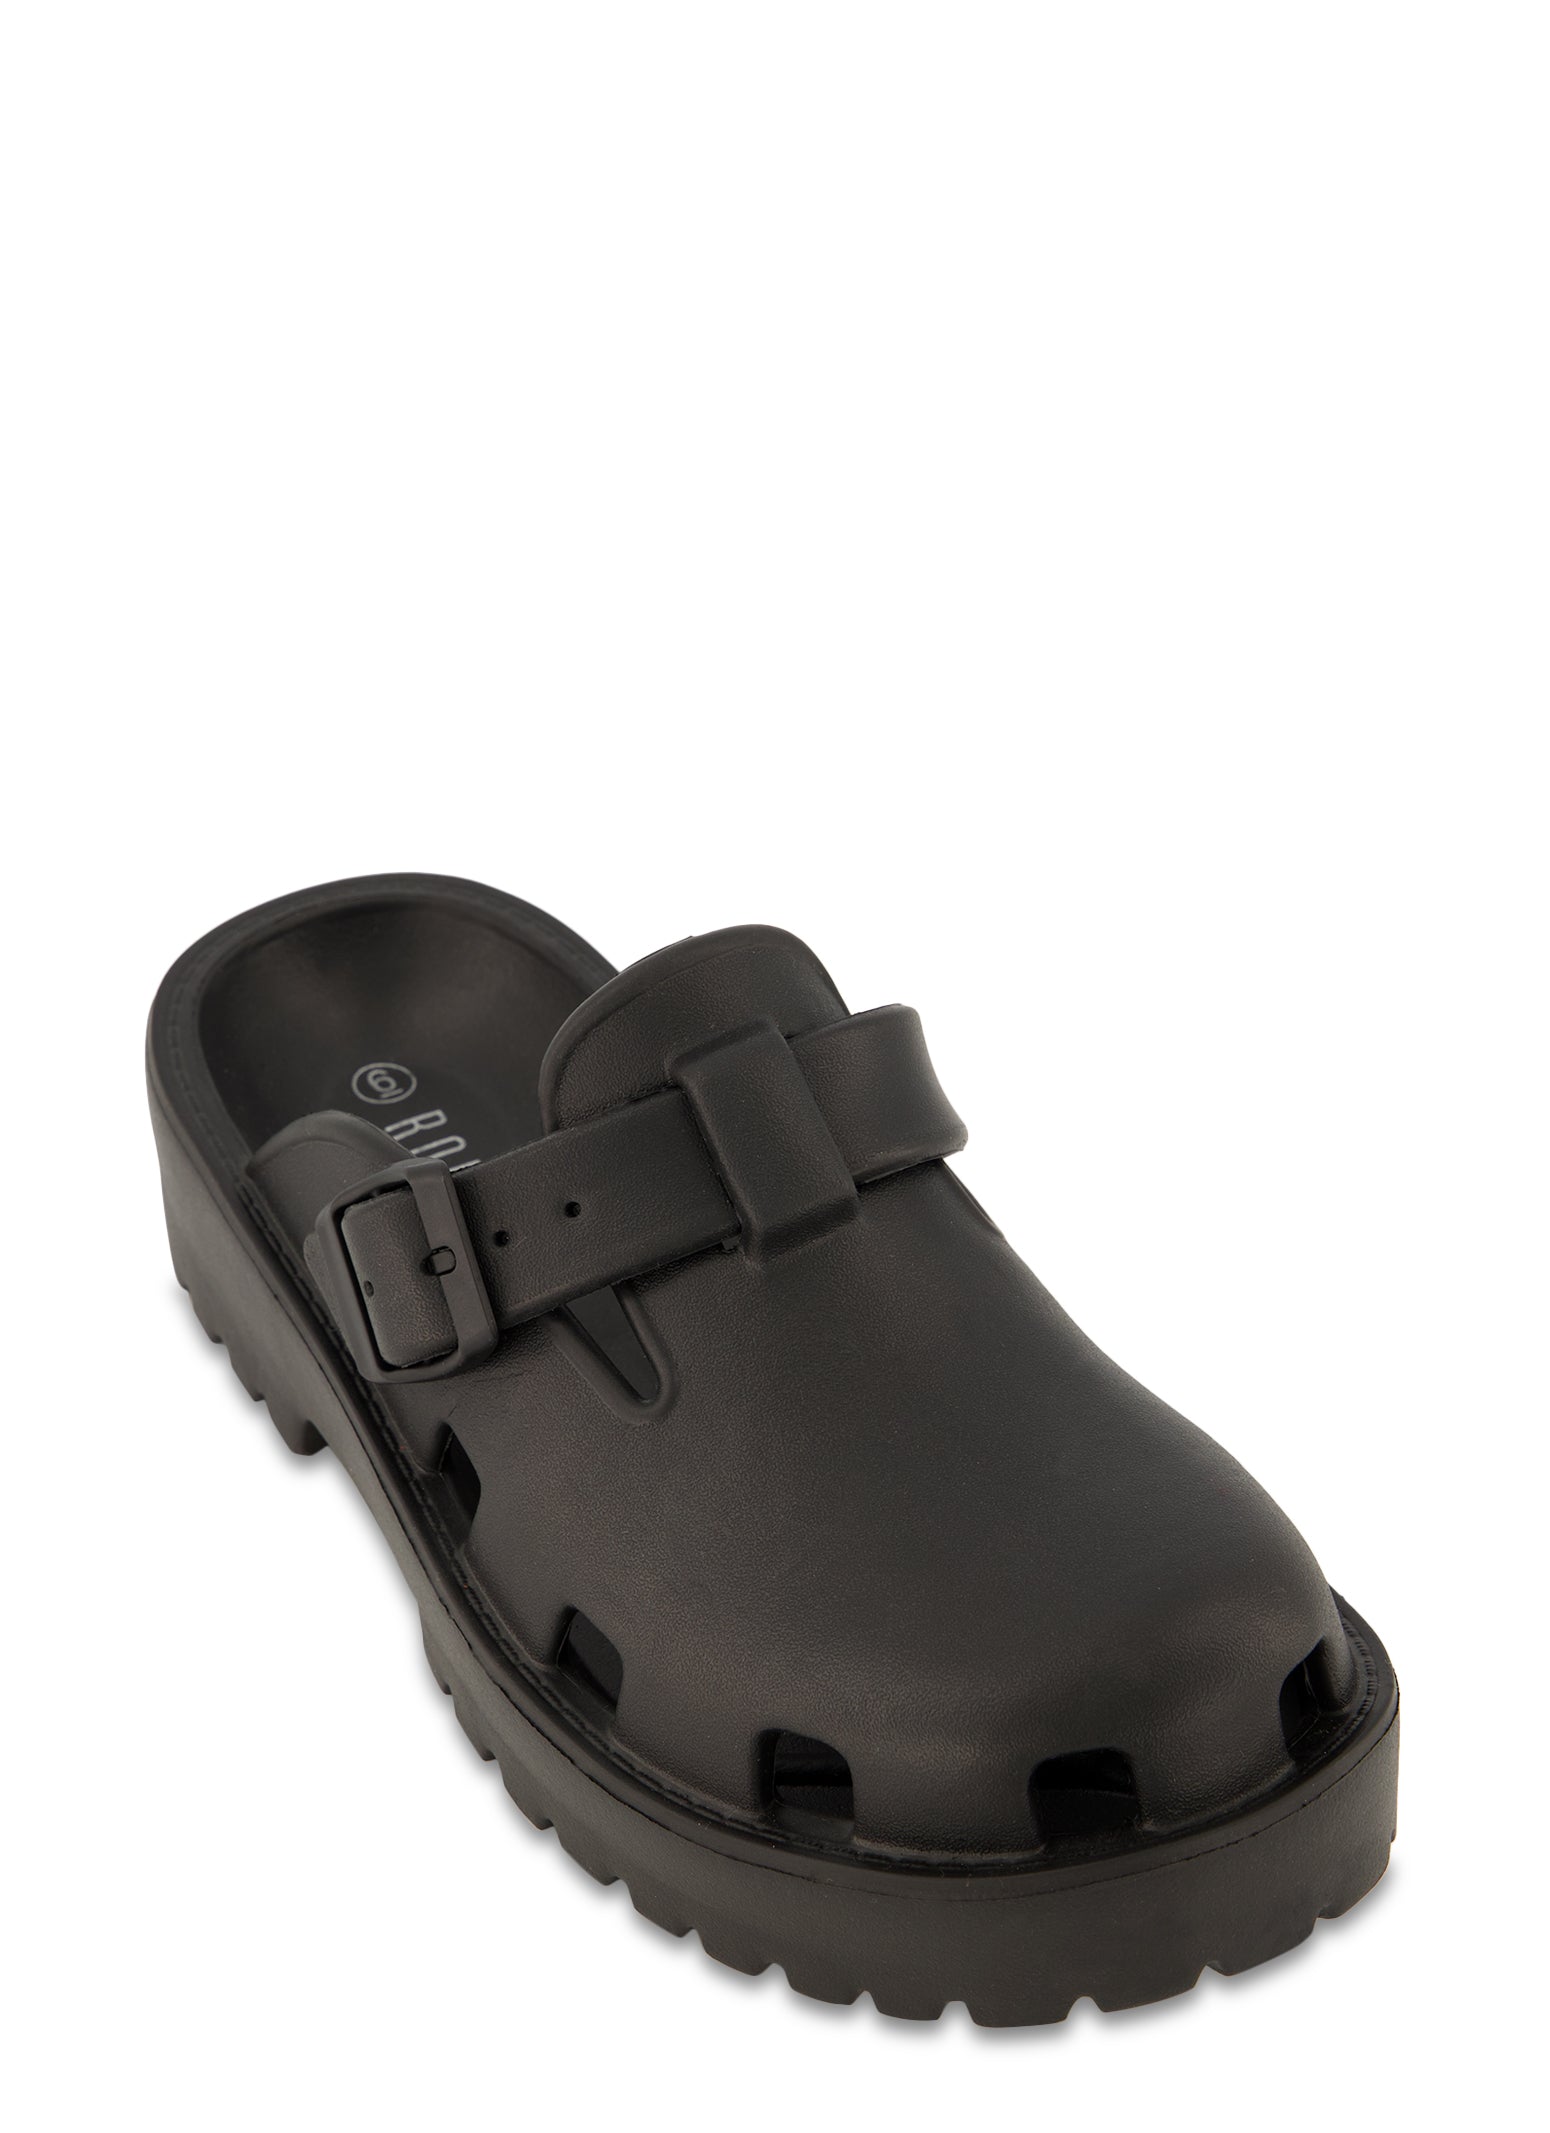 Buckle Cut Out Slip On Clogs